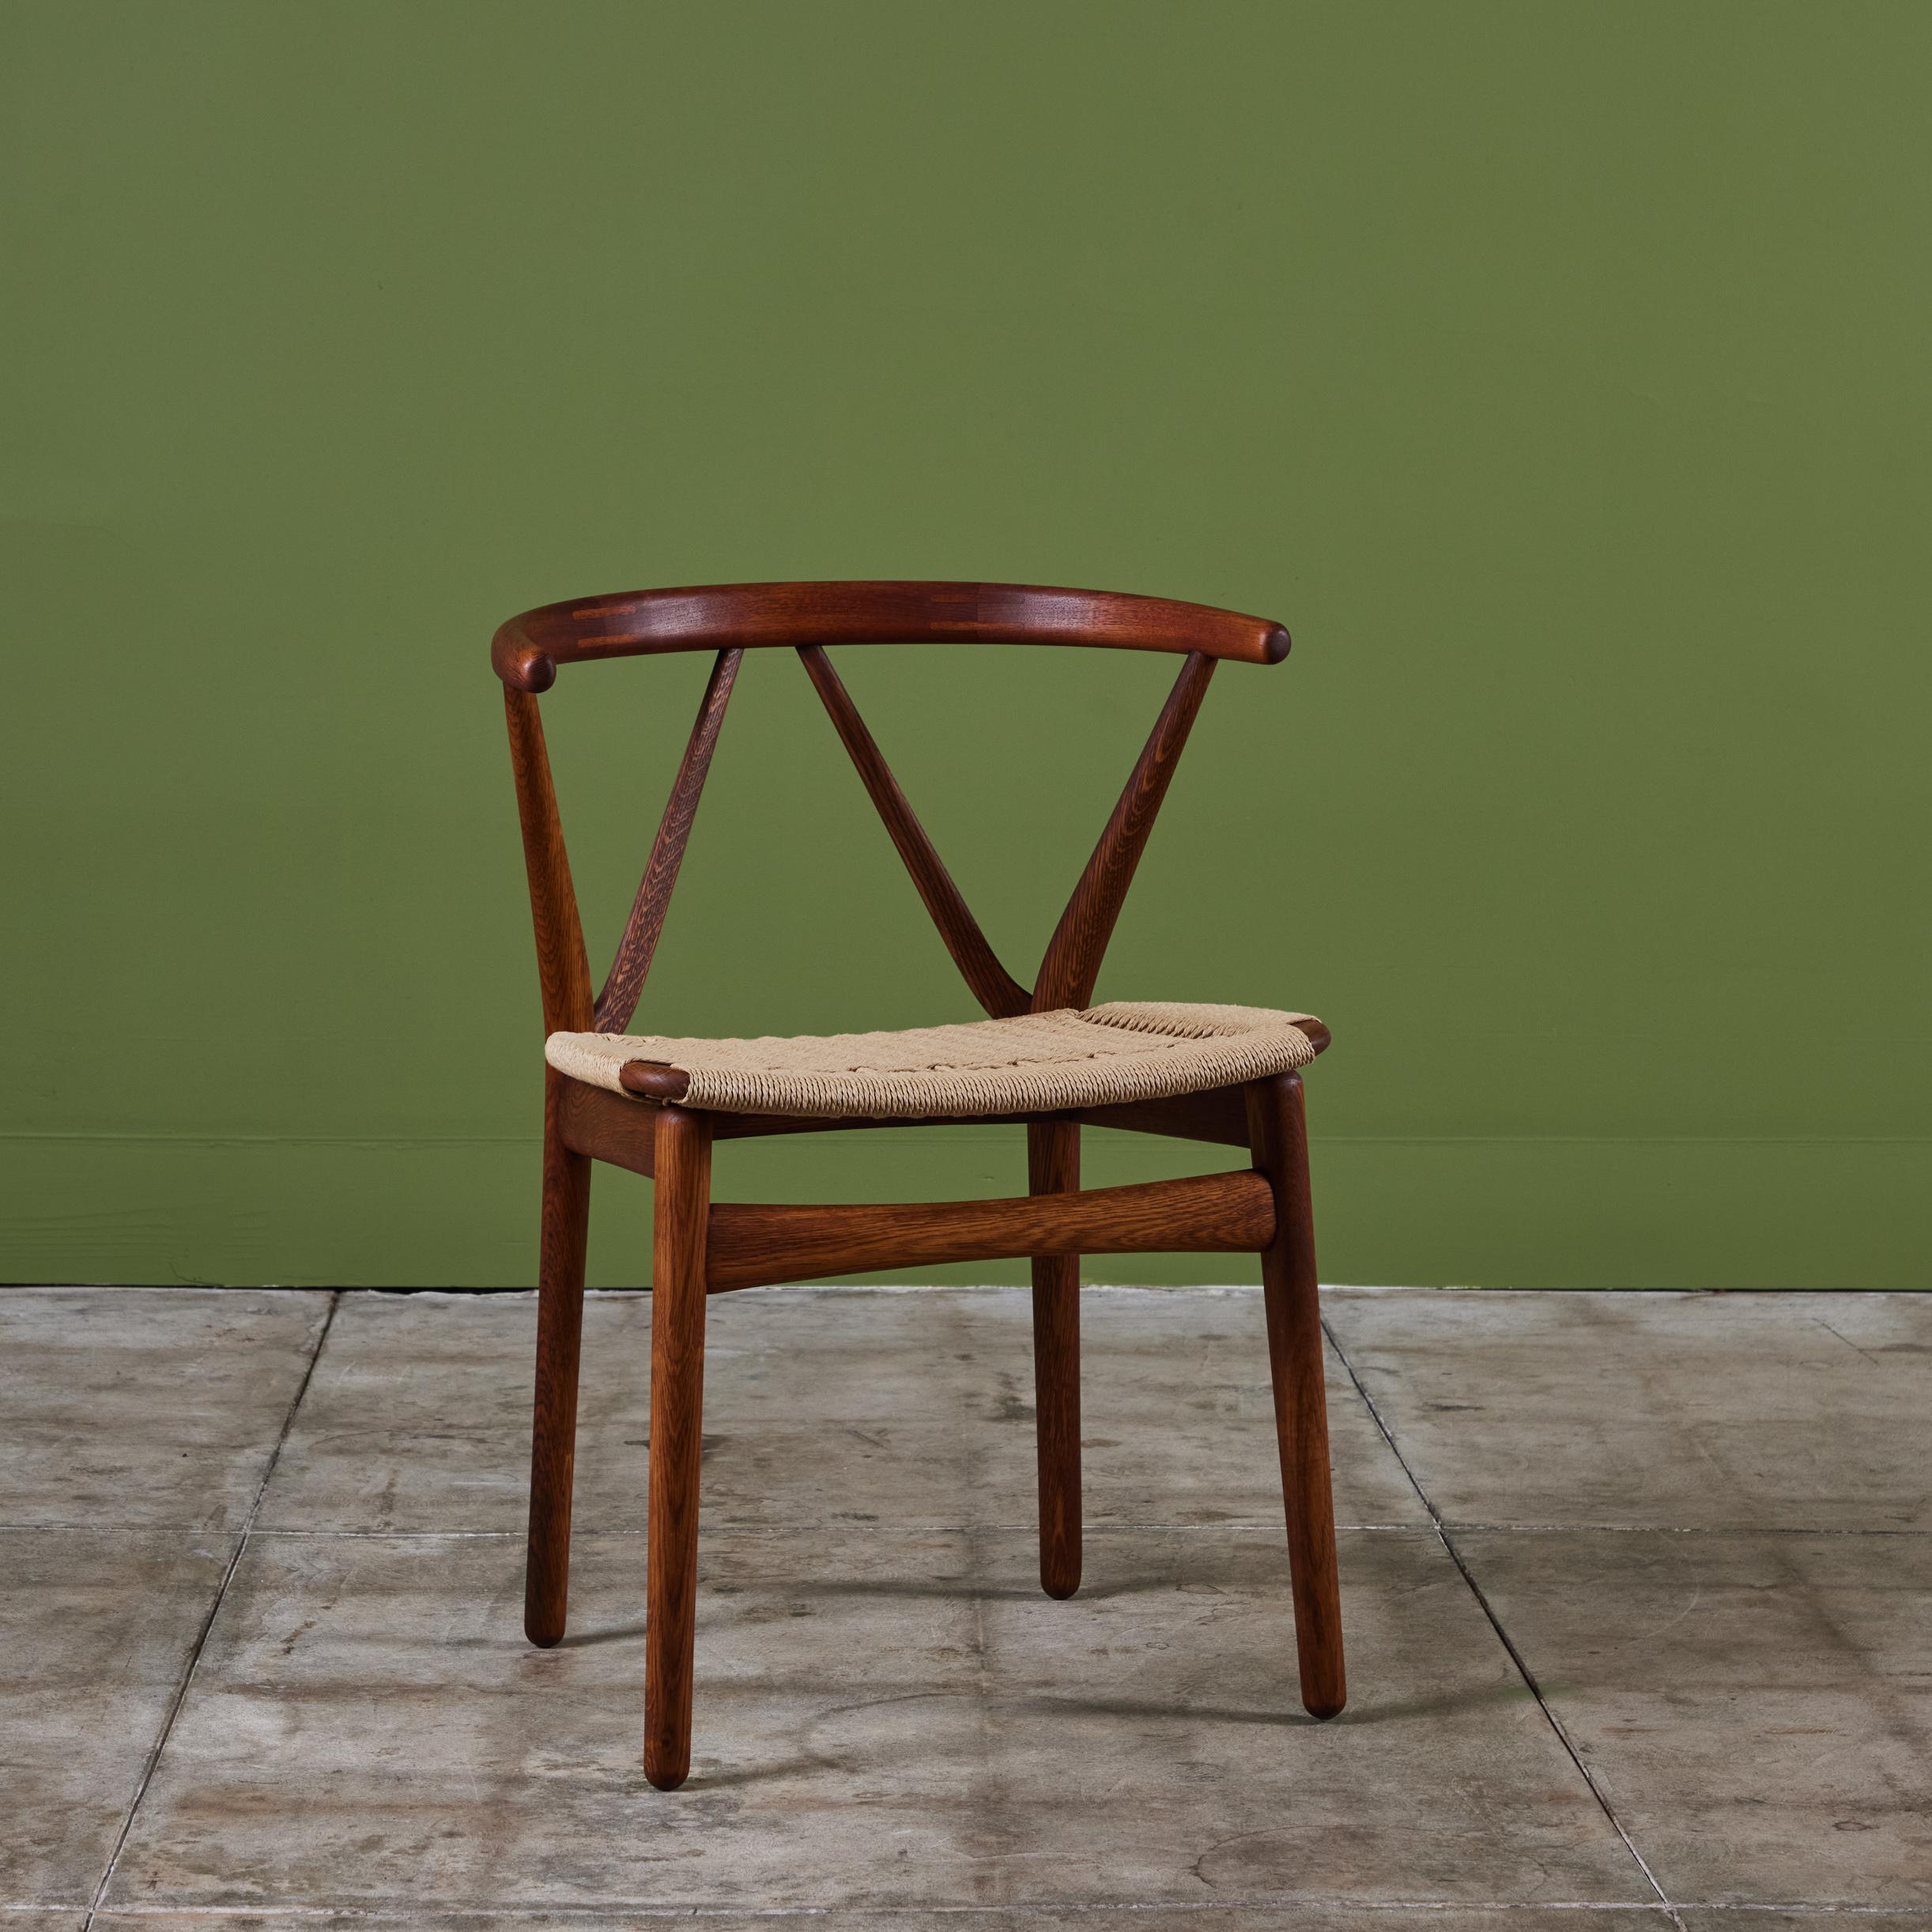 Dining chair from Henning Kjaernulf, produced by Bruno Hansen. Constructed in teak and oak, with a woven paper cord seat and a curved backrest with angled supports, reminiscent of Hans Wenger’s “Wishbone” chair. The chair rests on four rounded legs